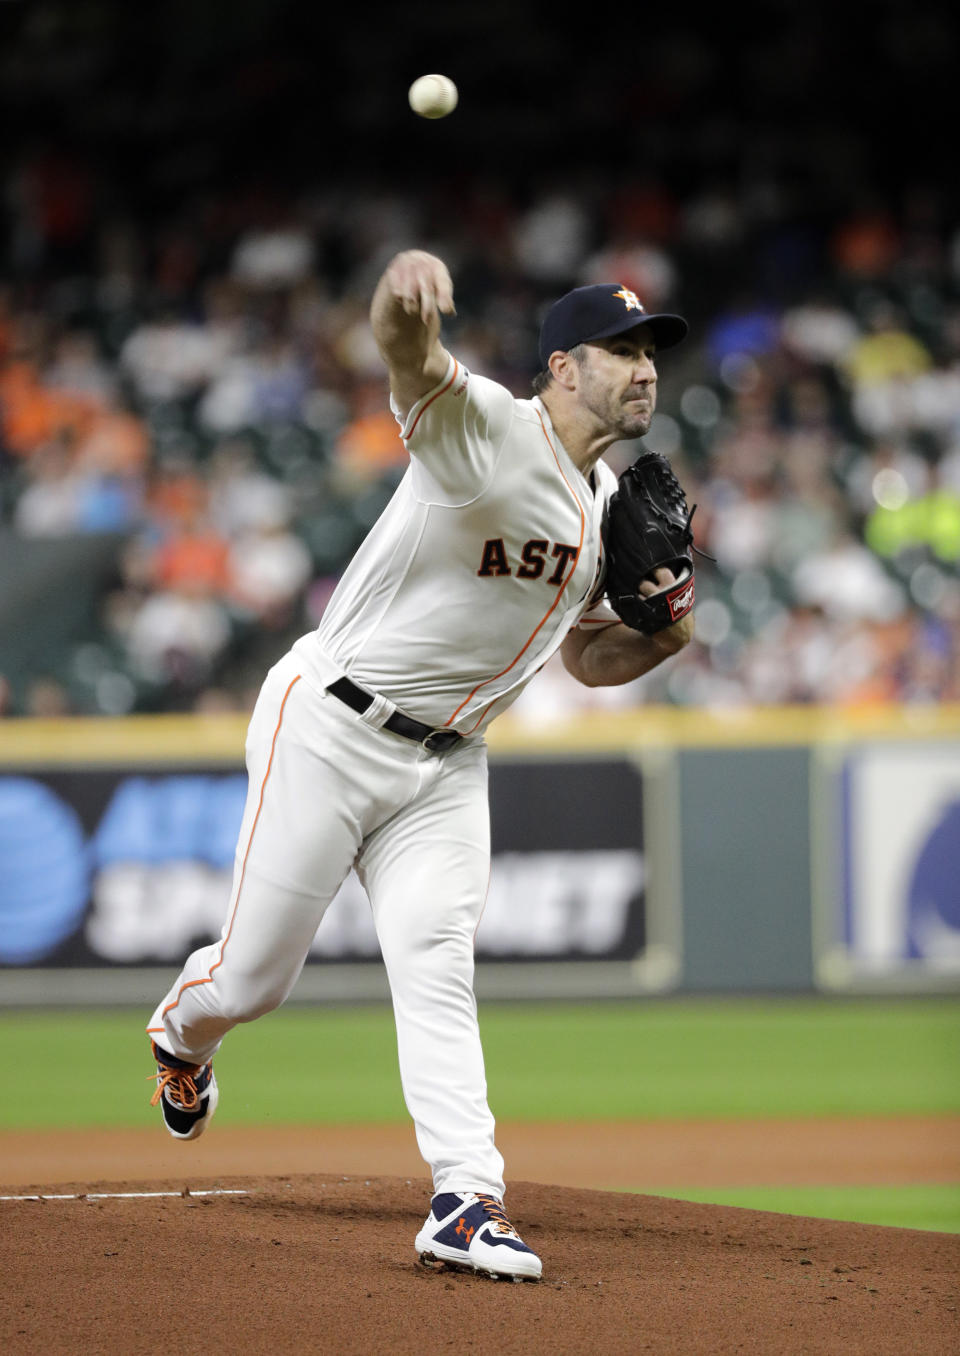 Houston Astros starting pitcher Justin Verlander throws against the Texas Rangers during the first inning of a baseball game Tuesday, Sept. 17, 2019, in Houston. (AP Photo/David J. Phillip)